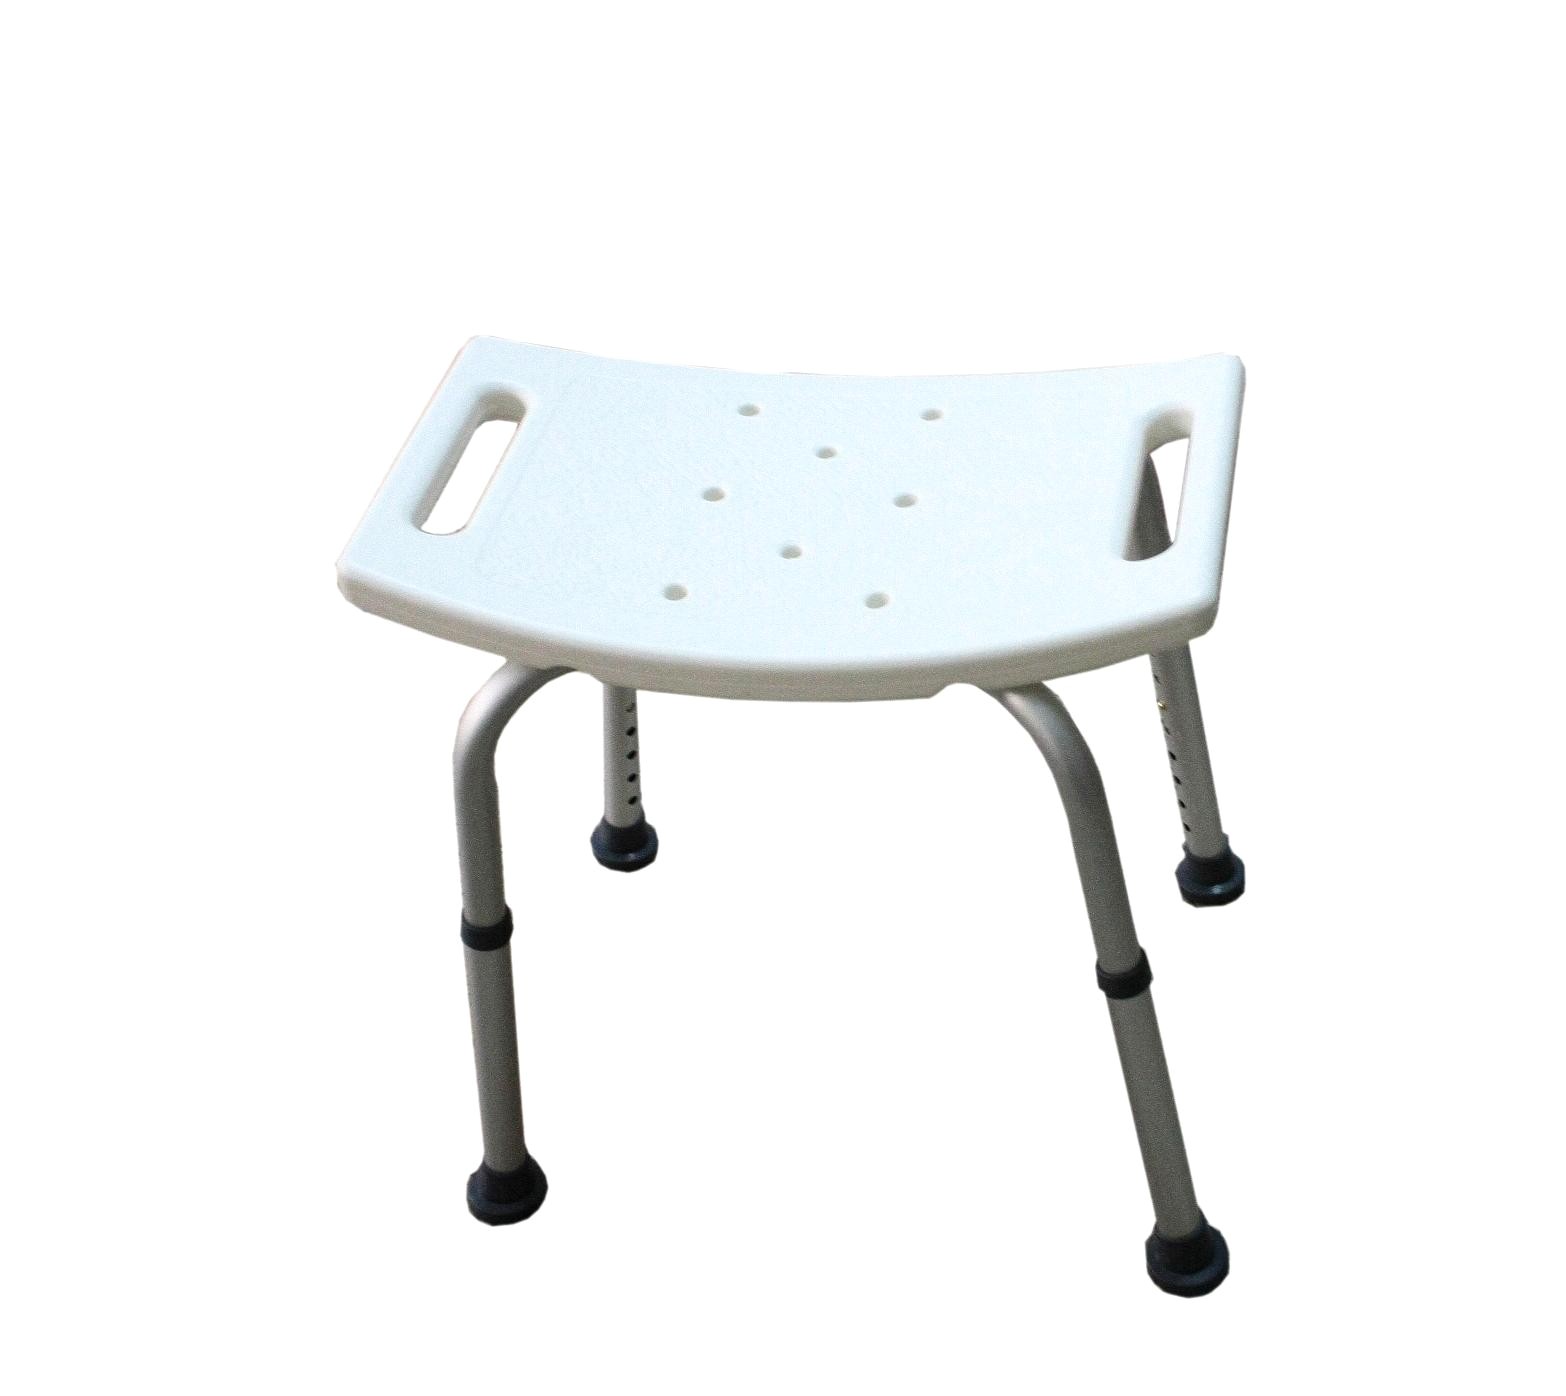 Extended Shower Chair Fantastic Folding Shower Chairs for Disabled Model Bathroom and